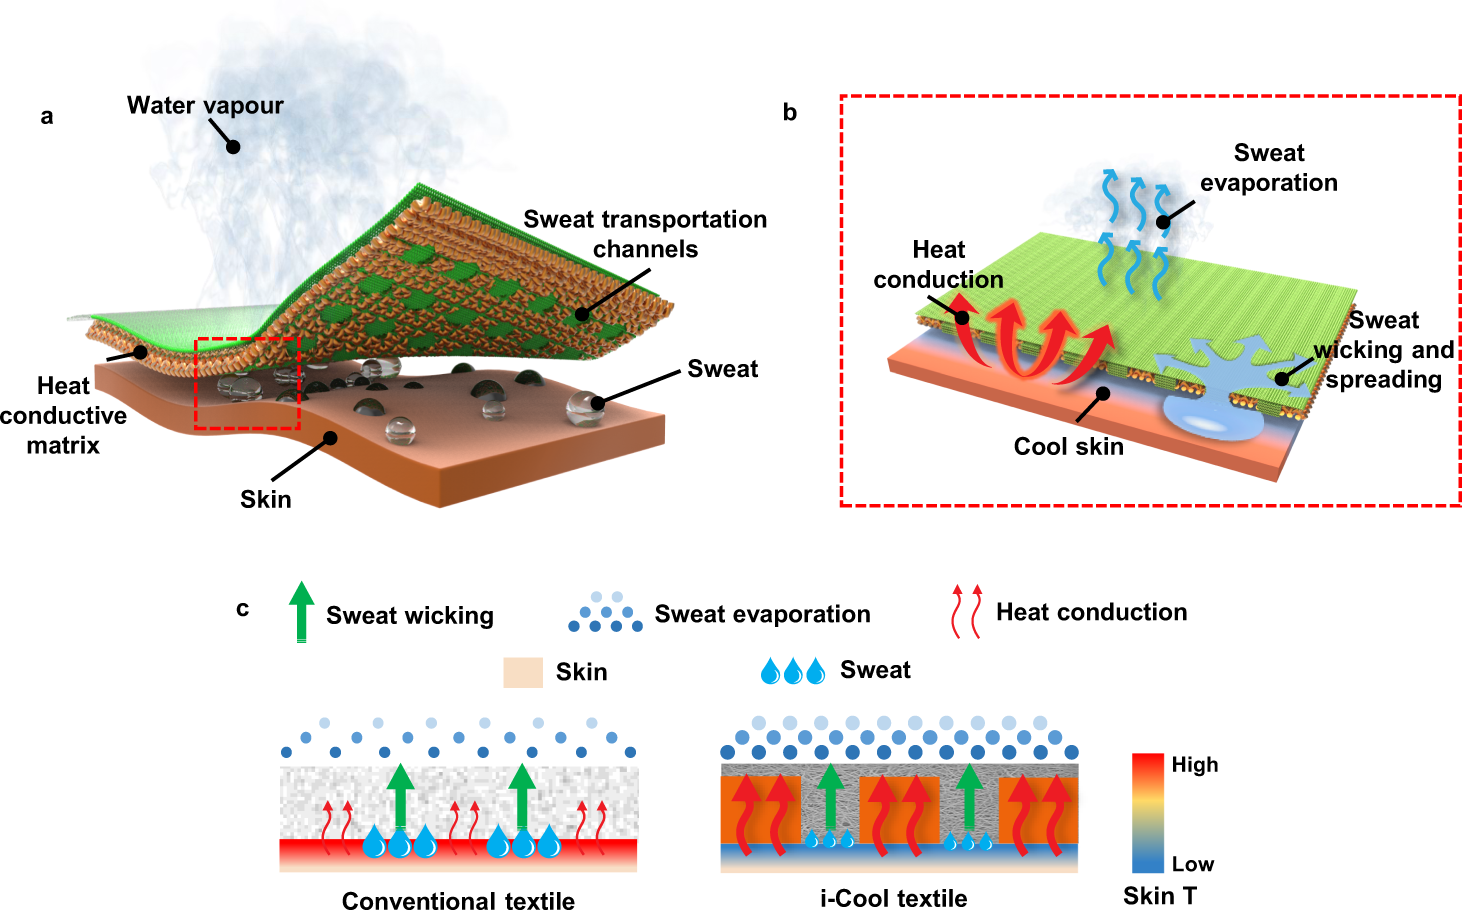 Integrated cooling (i-Cool) textile of heat conduction and sweat  transportation for personal perspiration management | Nature Communications